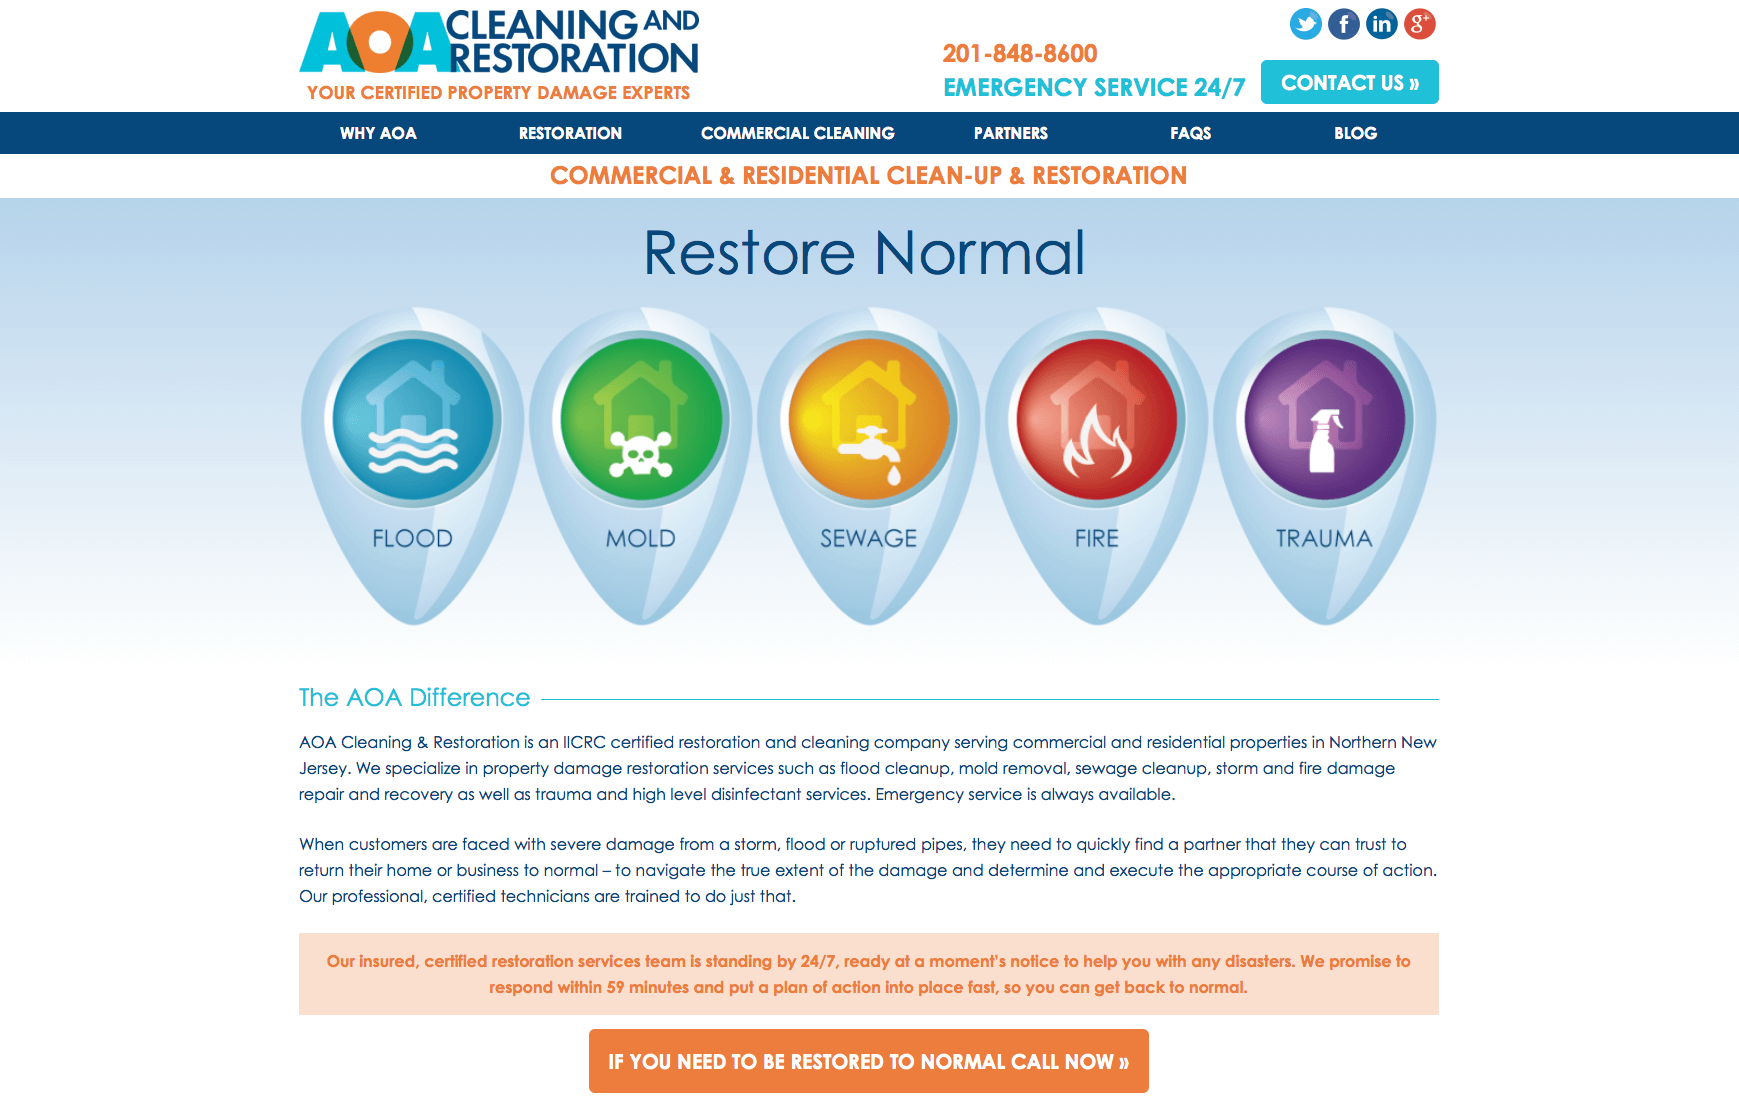 AOA Cleaning & Restoration Website by Creare Marketing